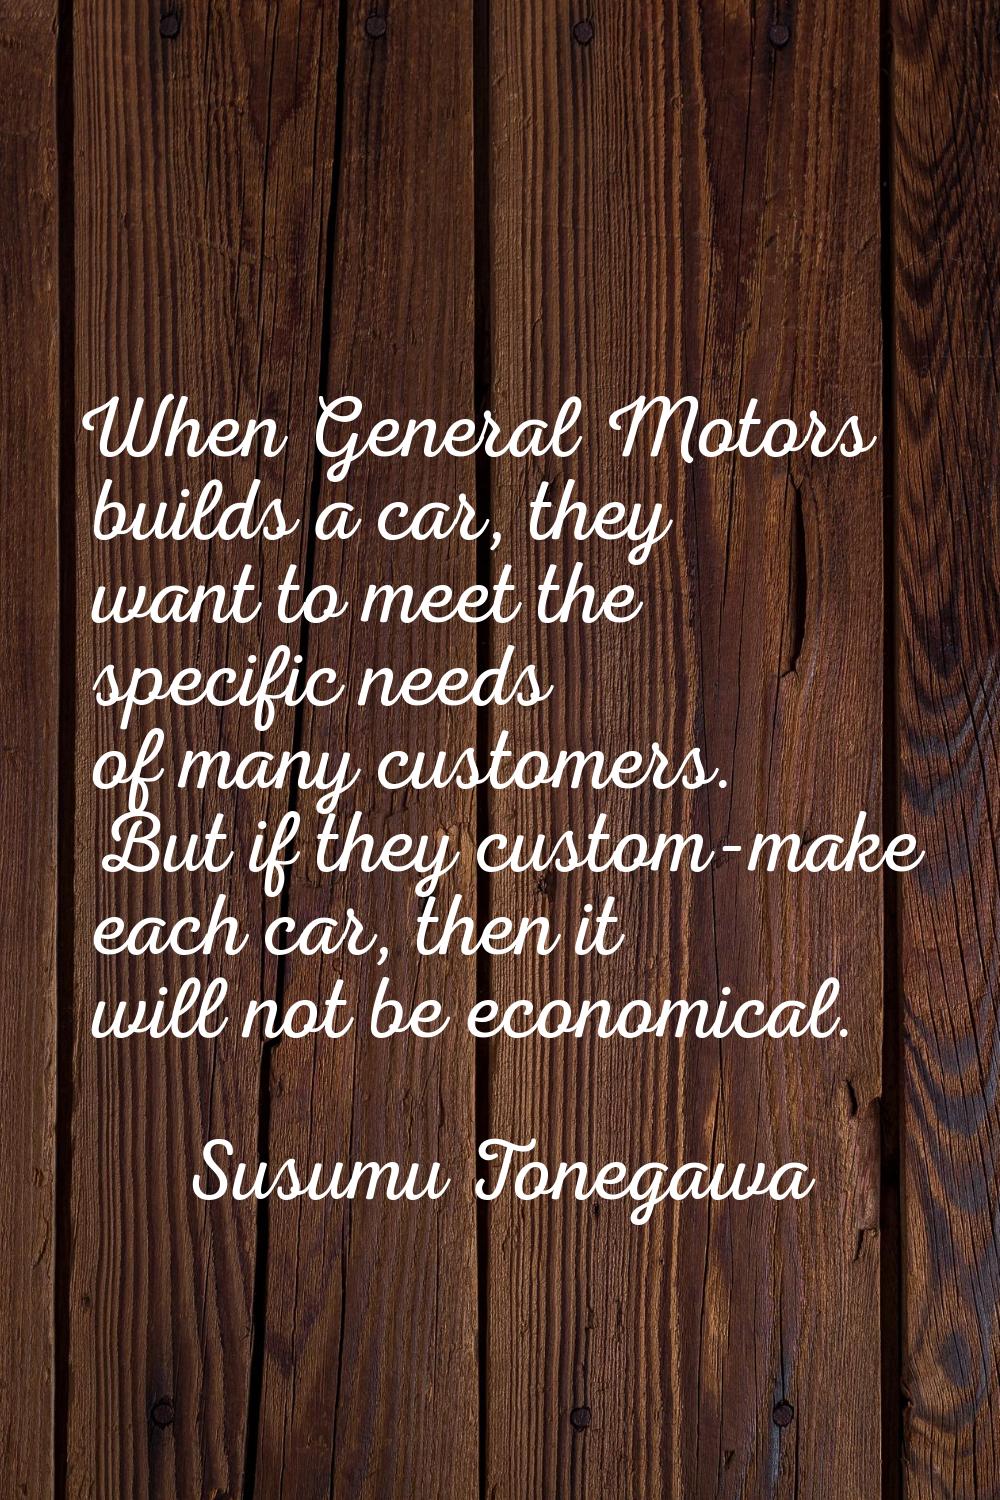 When General Motors builds a car, they want to meet the specific needs of many customers. But if th